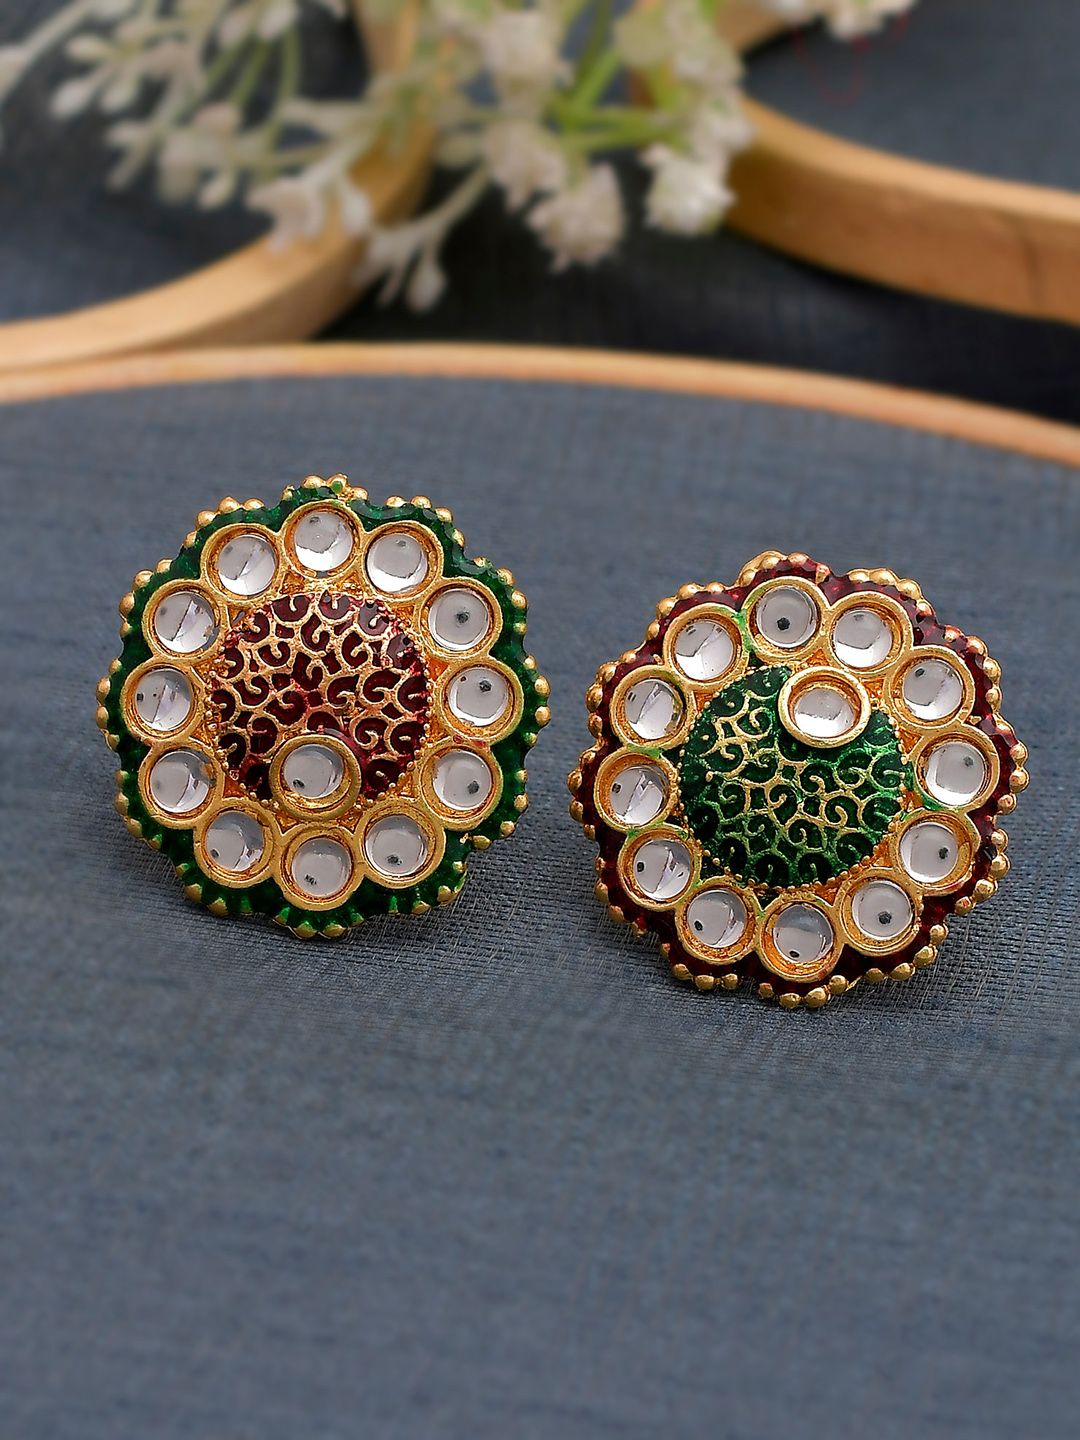 Silvermerc Designs Set Of 2 Gold-Plated Stone-Studded Meenakari Finger Rings Price in India